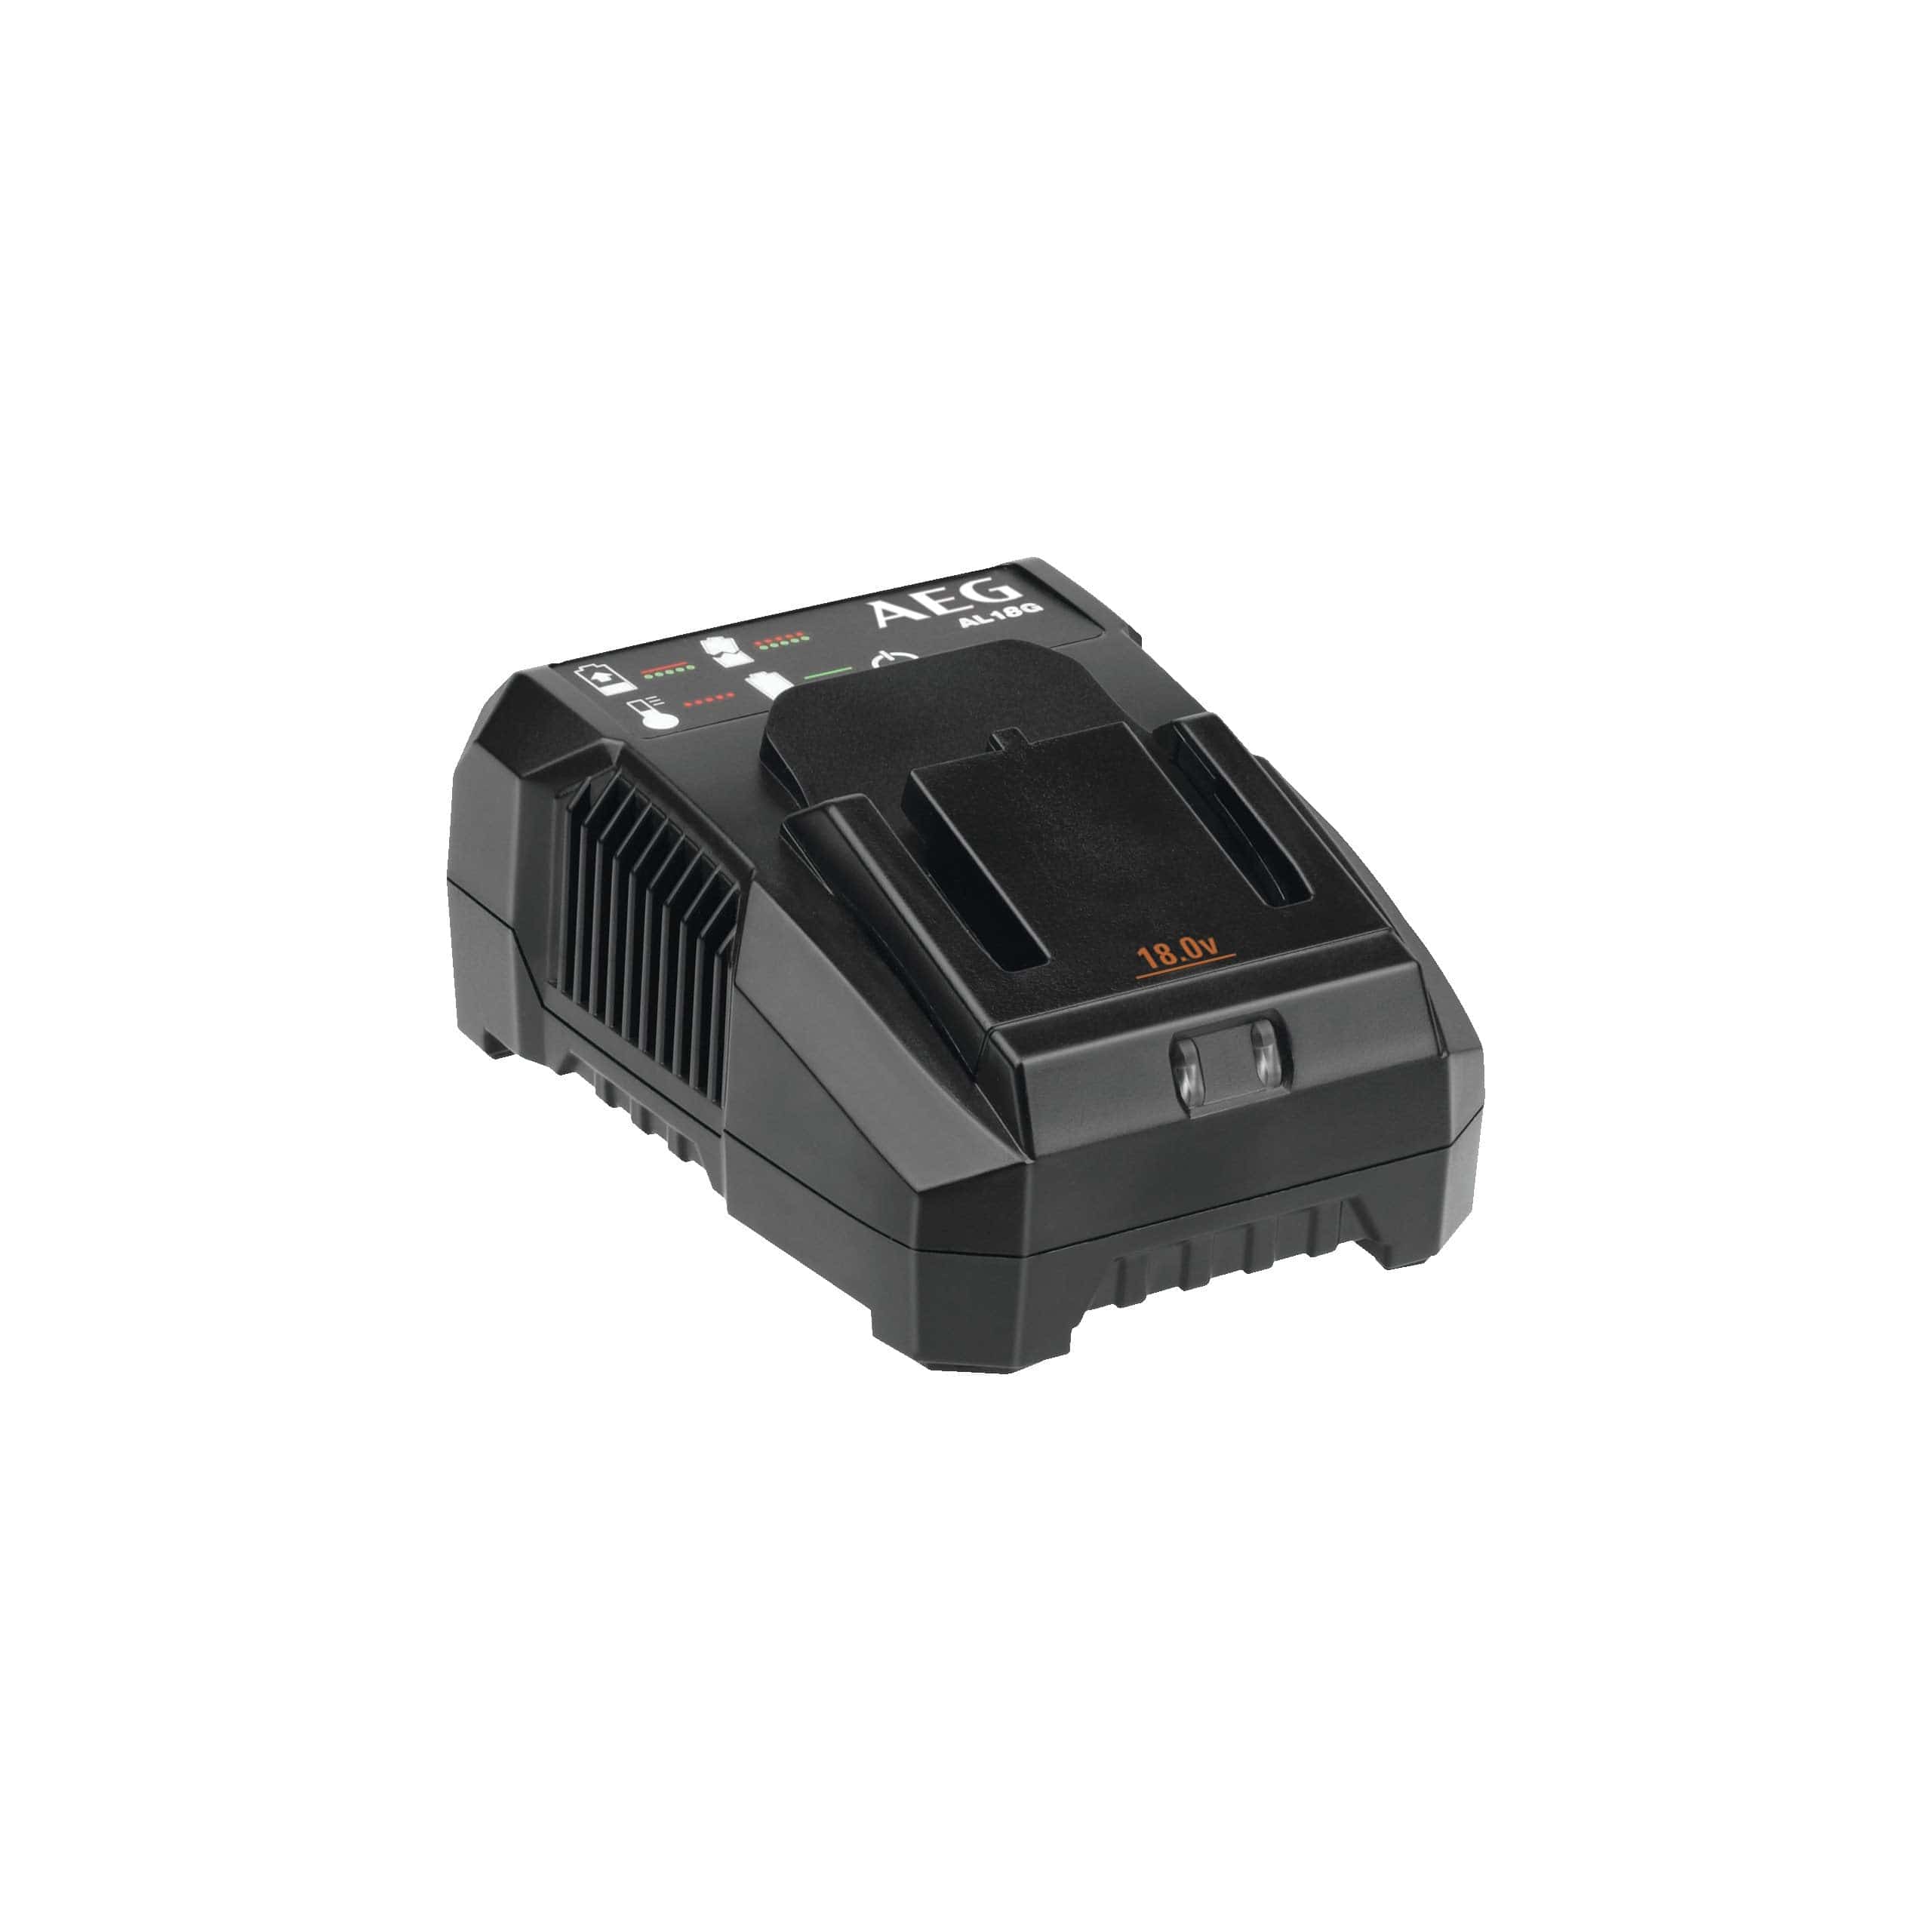 AEG 18V Pro Lithium-Ion Battery Charger (Model AL18G) - Fast Charging for AEG Cordless Tools | Supply Master Batteries & Chargers Buy Tools hardware Building materials